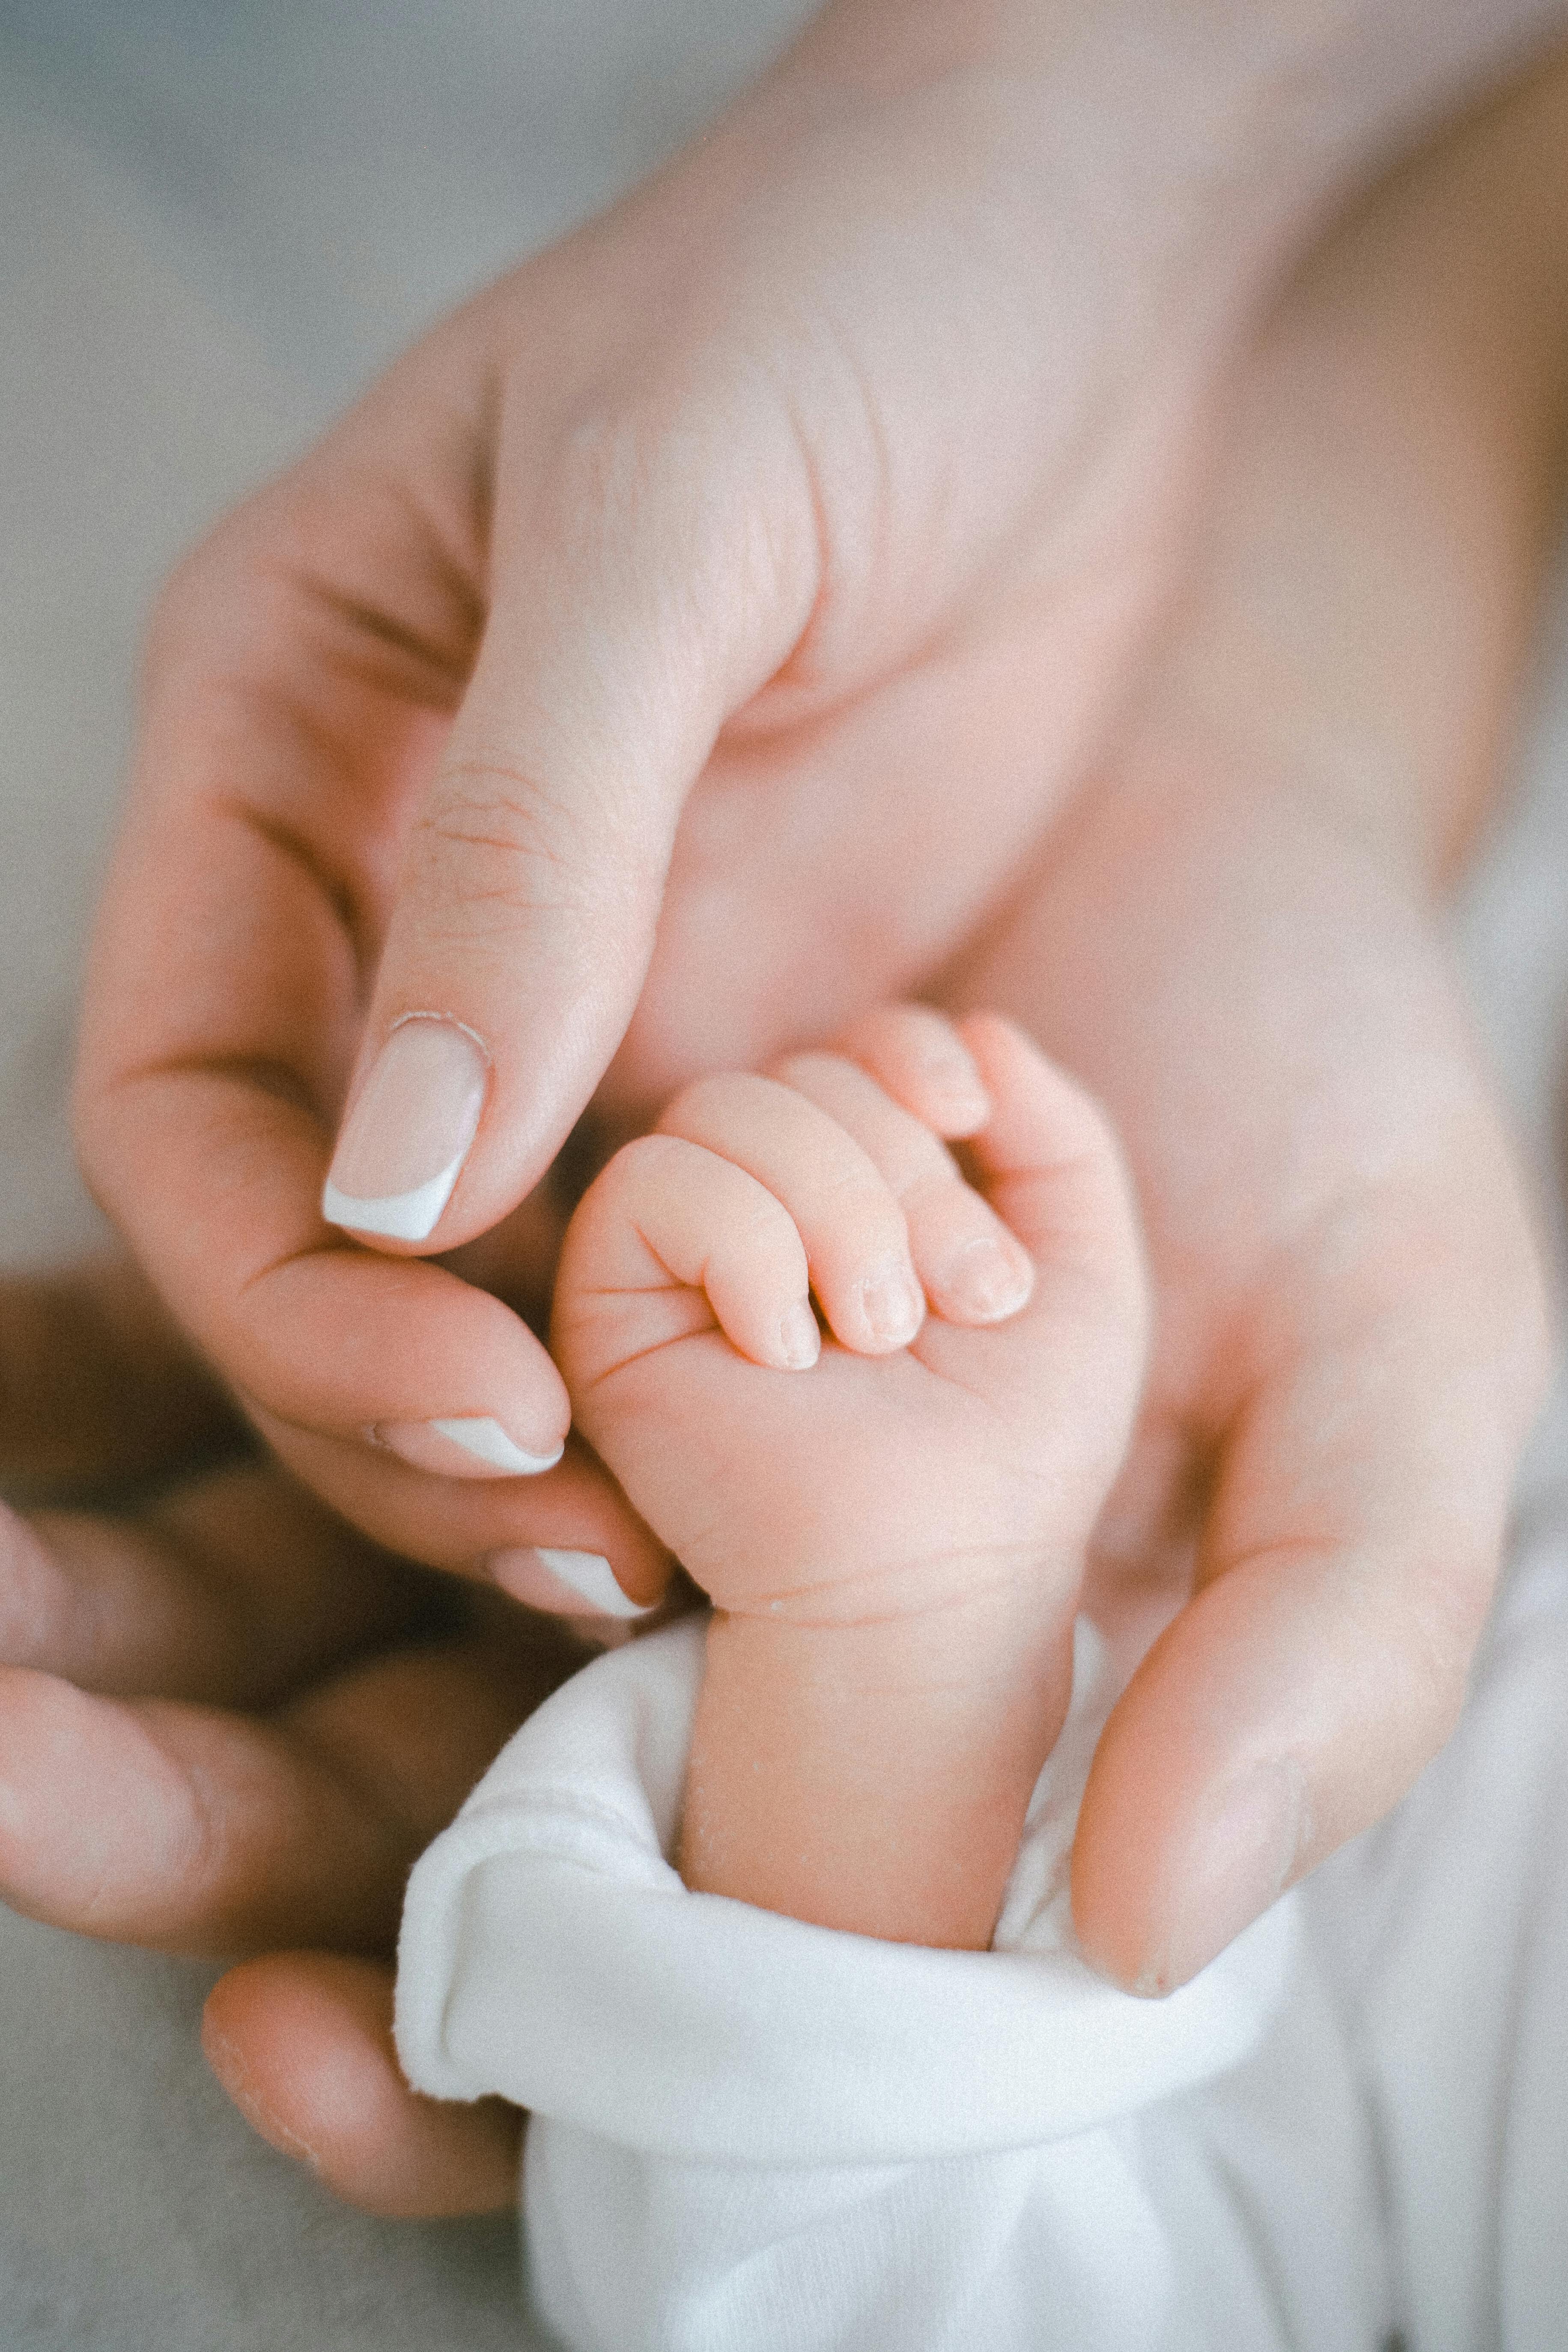 Parents' hands holding their little one's | Source: Pexels